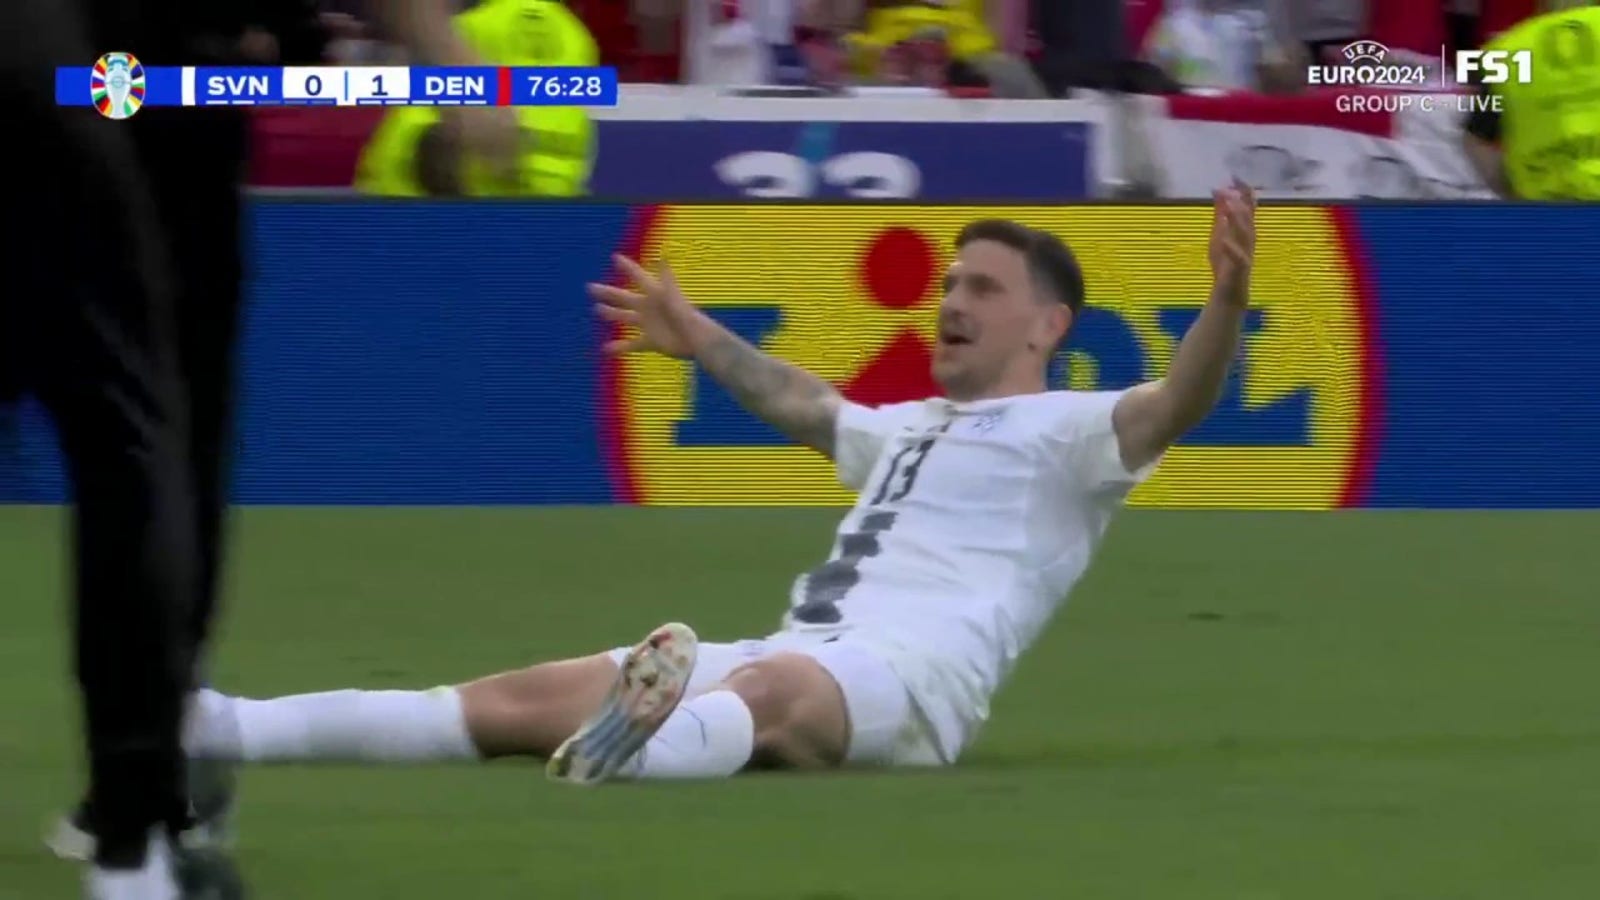 Slovenia's Erik Janza finds the back of the net in 77' to equalize against Denmark | UEFA Euro 2024